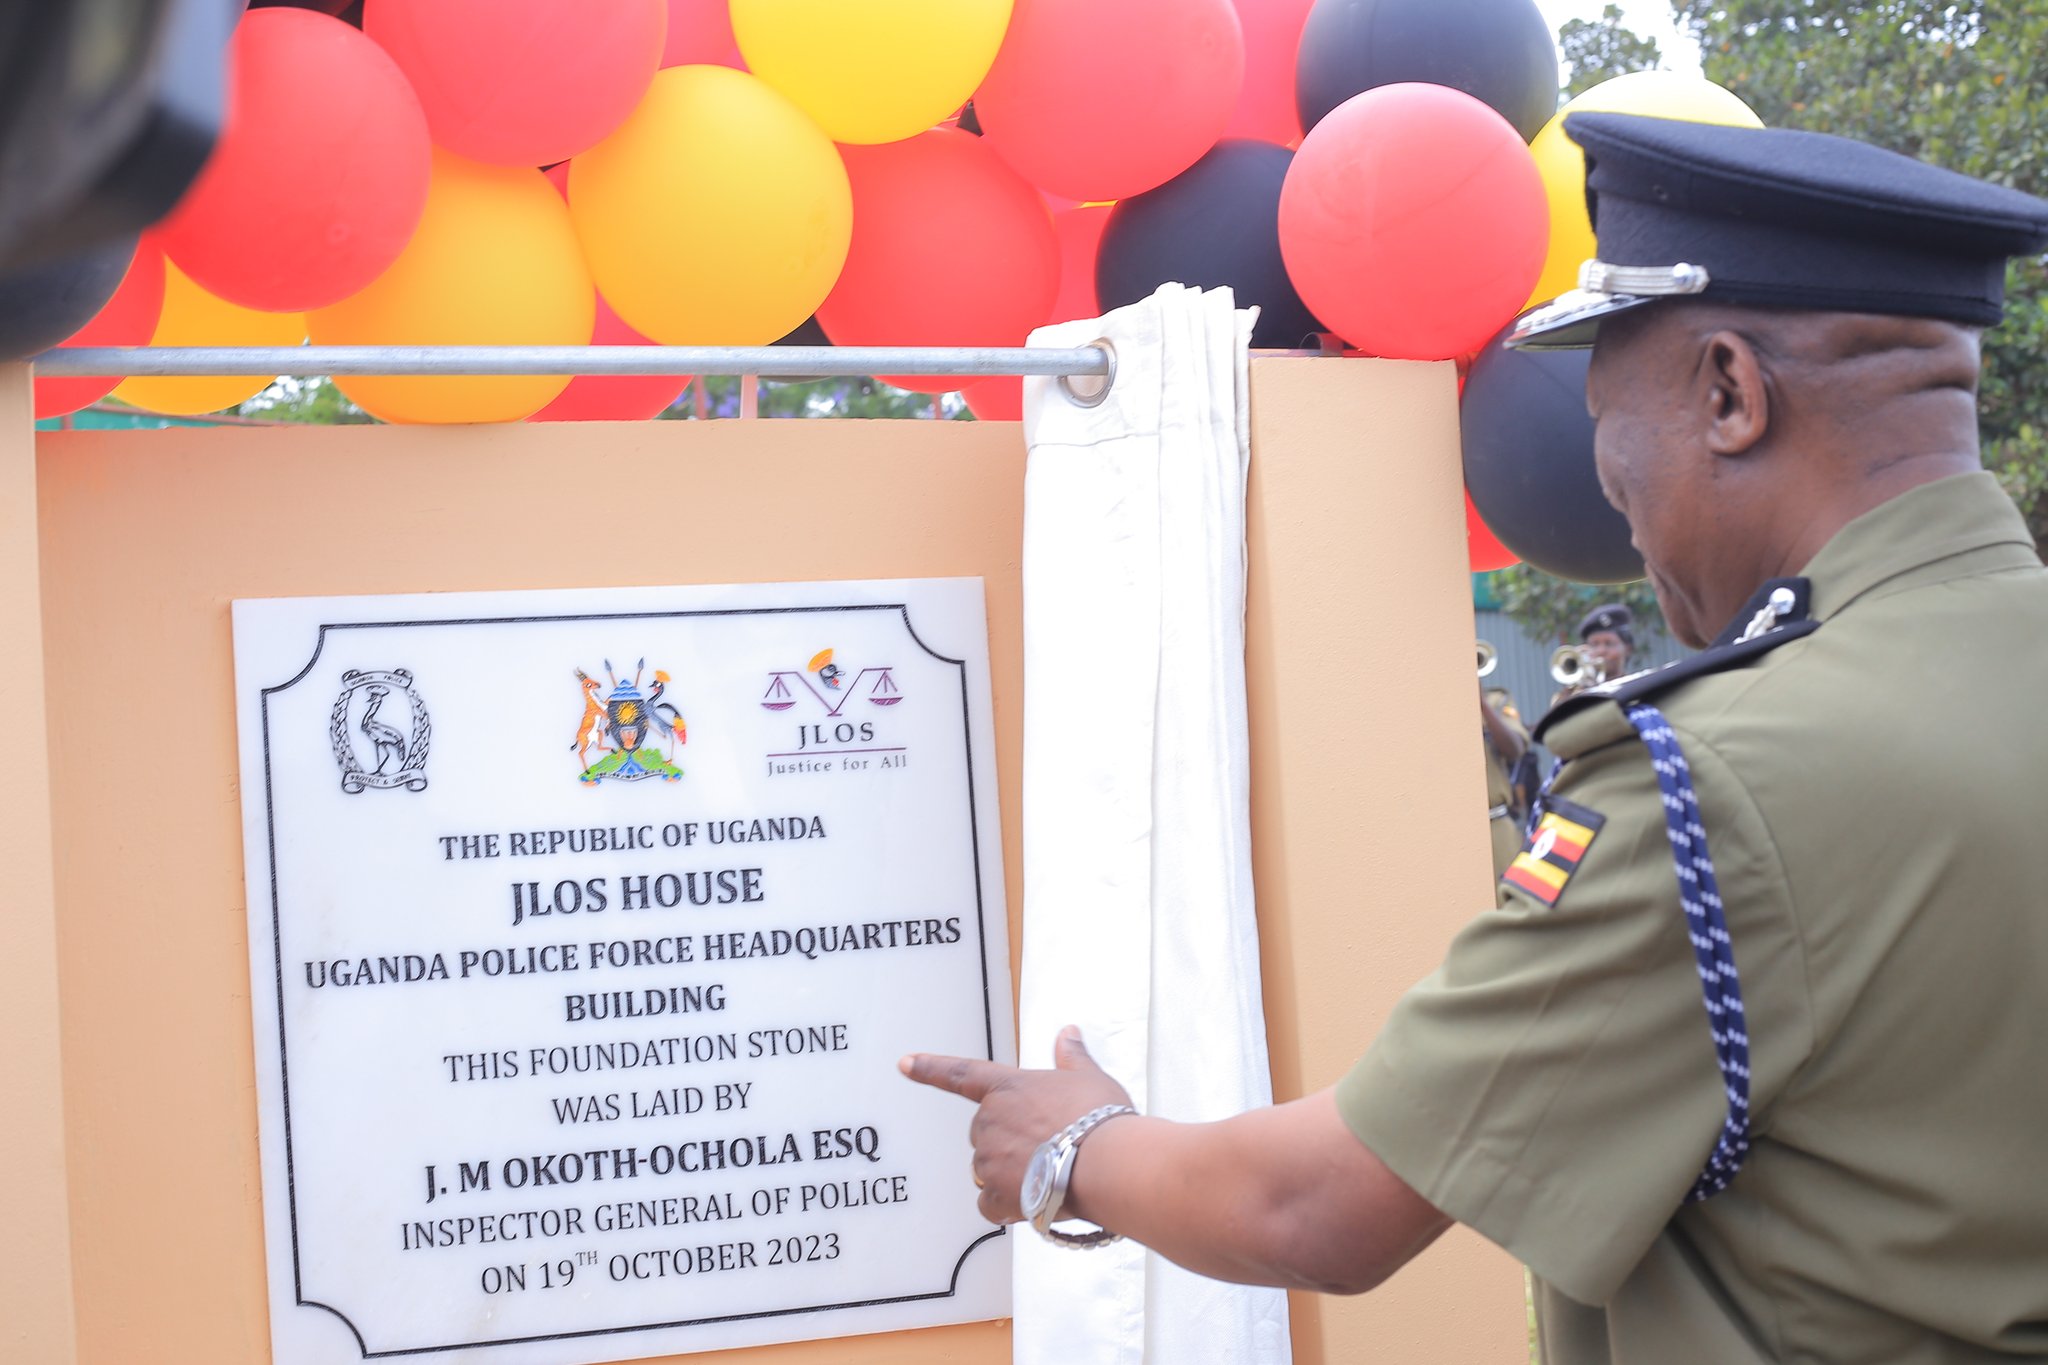 Constructions of Police Headquarters commences